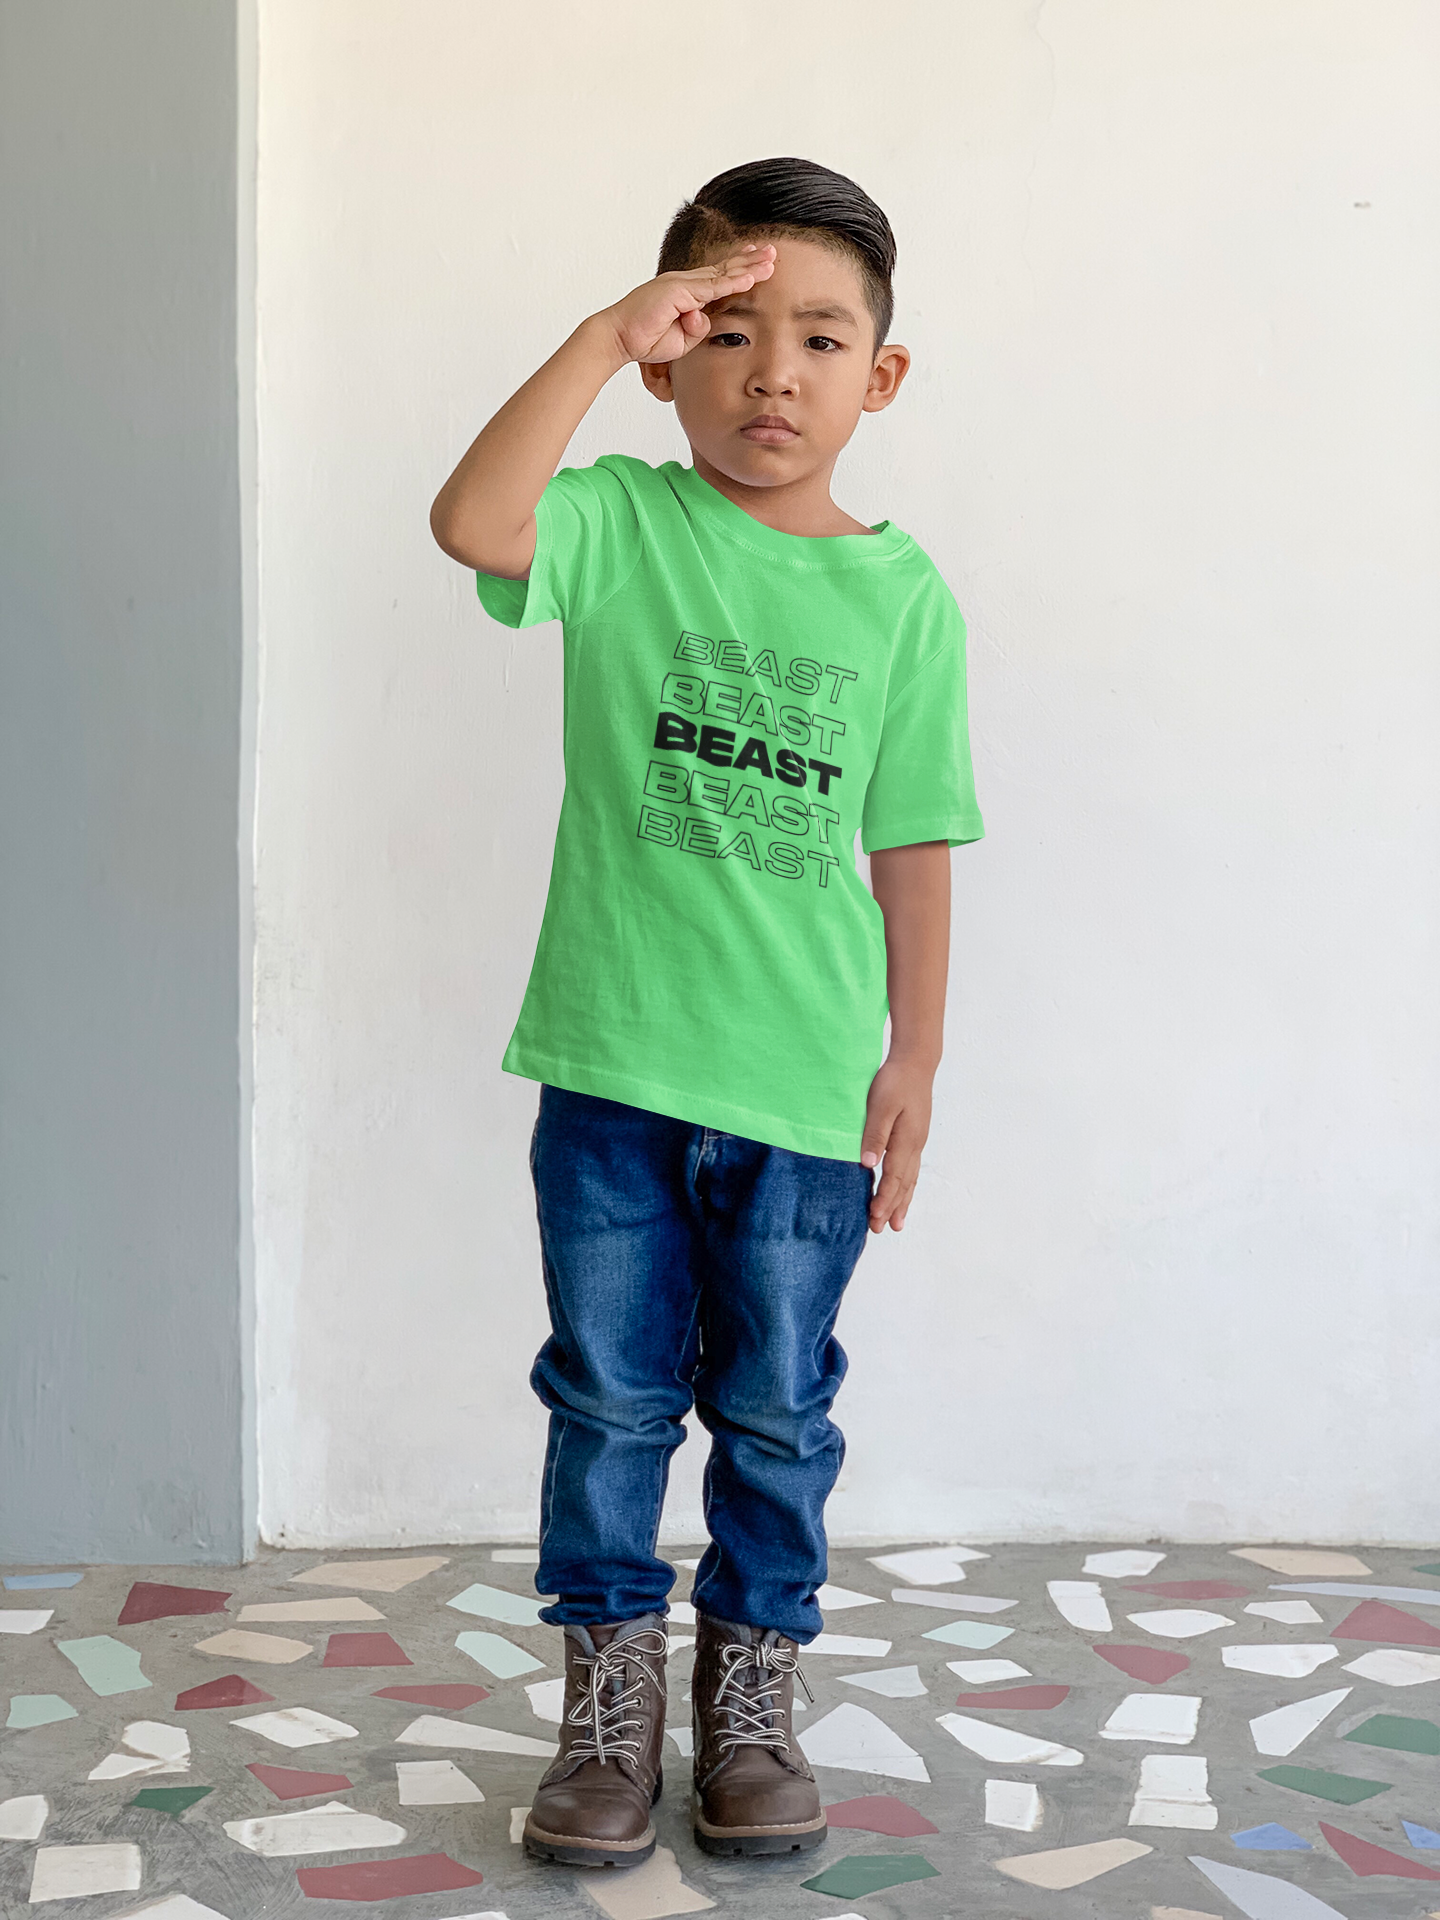 t-shirt-mockup-of-a-little-boy-doing-a-soldier-salute-45096-r-el2.png